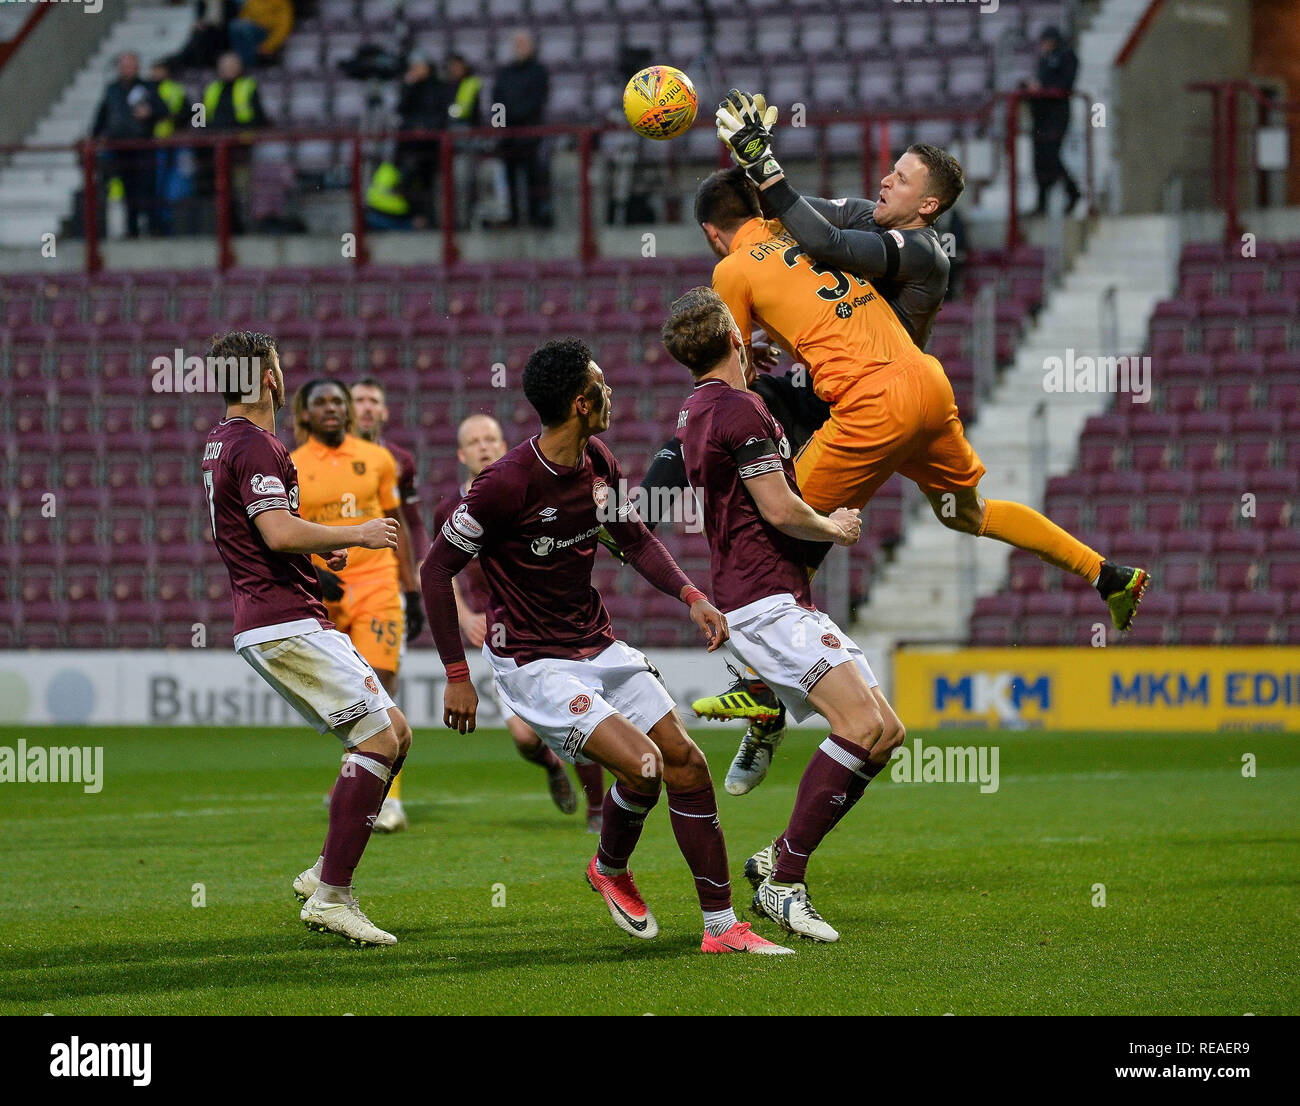 Edinburgh, Scotland, UK. 20th January, 2019.   Heart of Midlothian took on Premiership rivals Livingston in the fourth round of the William Hill Scottish Cup tie at Tynecastle today. The Edinburgh side came out on top thanks to a second half strike from Sean Clare. They now face heroes of the round junior side Auchinleck Talbot.  Pictured: Declan Gallagher (Livingston) sees his shot saved by Hearts goalkeeper Colin Doyle during the William Hill Scottish Cup fourth round match between Premiership rivals Hearts and Livingston at Tynecastle.  Dave Johnston / Alamy Live News Stock Photo